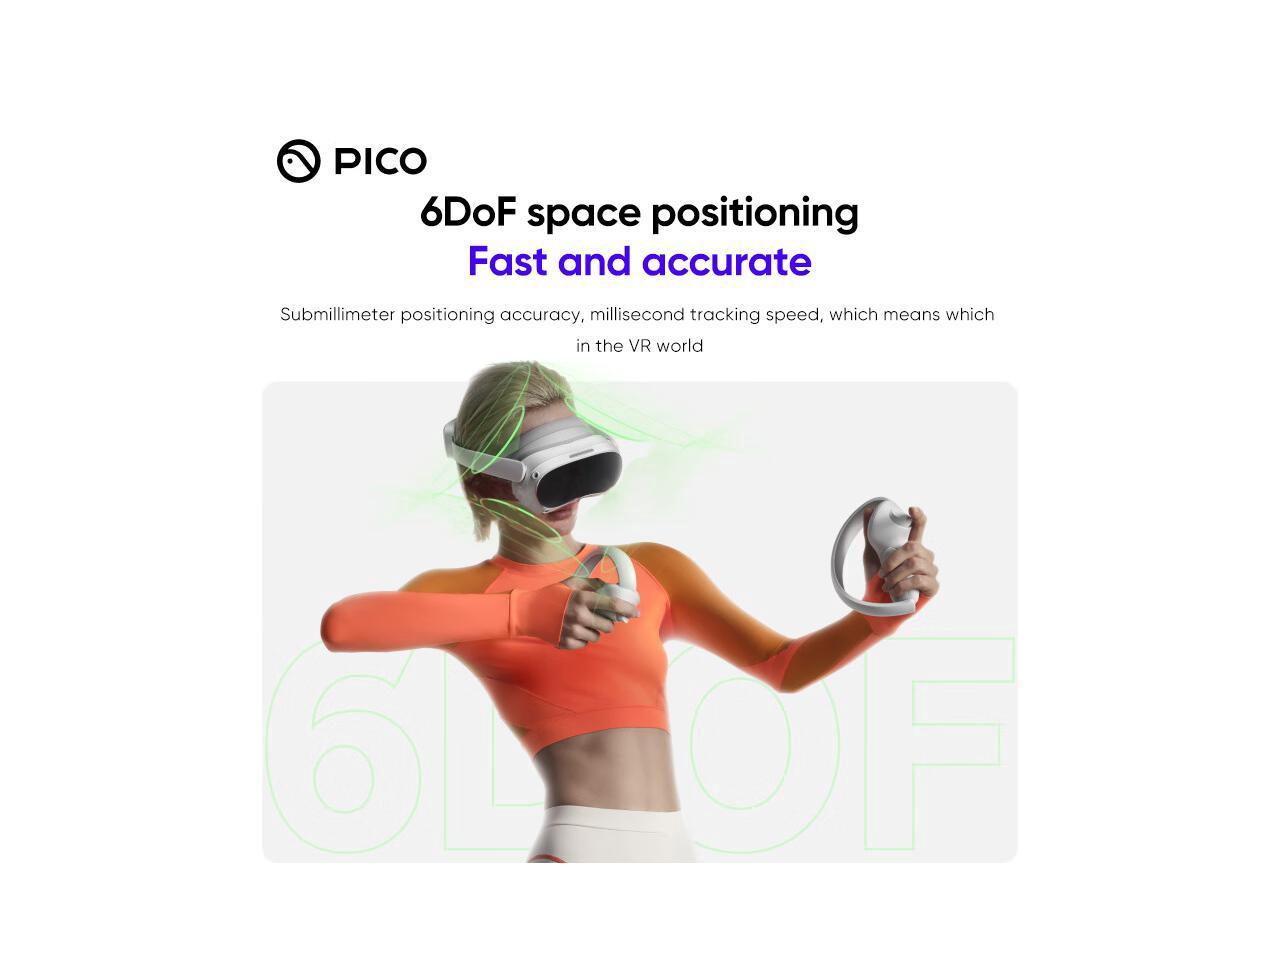 Pico 4 VR Headset 256GB Global version Pico4 All-In-One Virtual